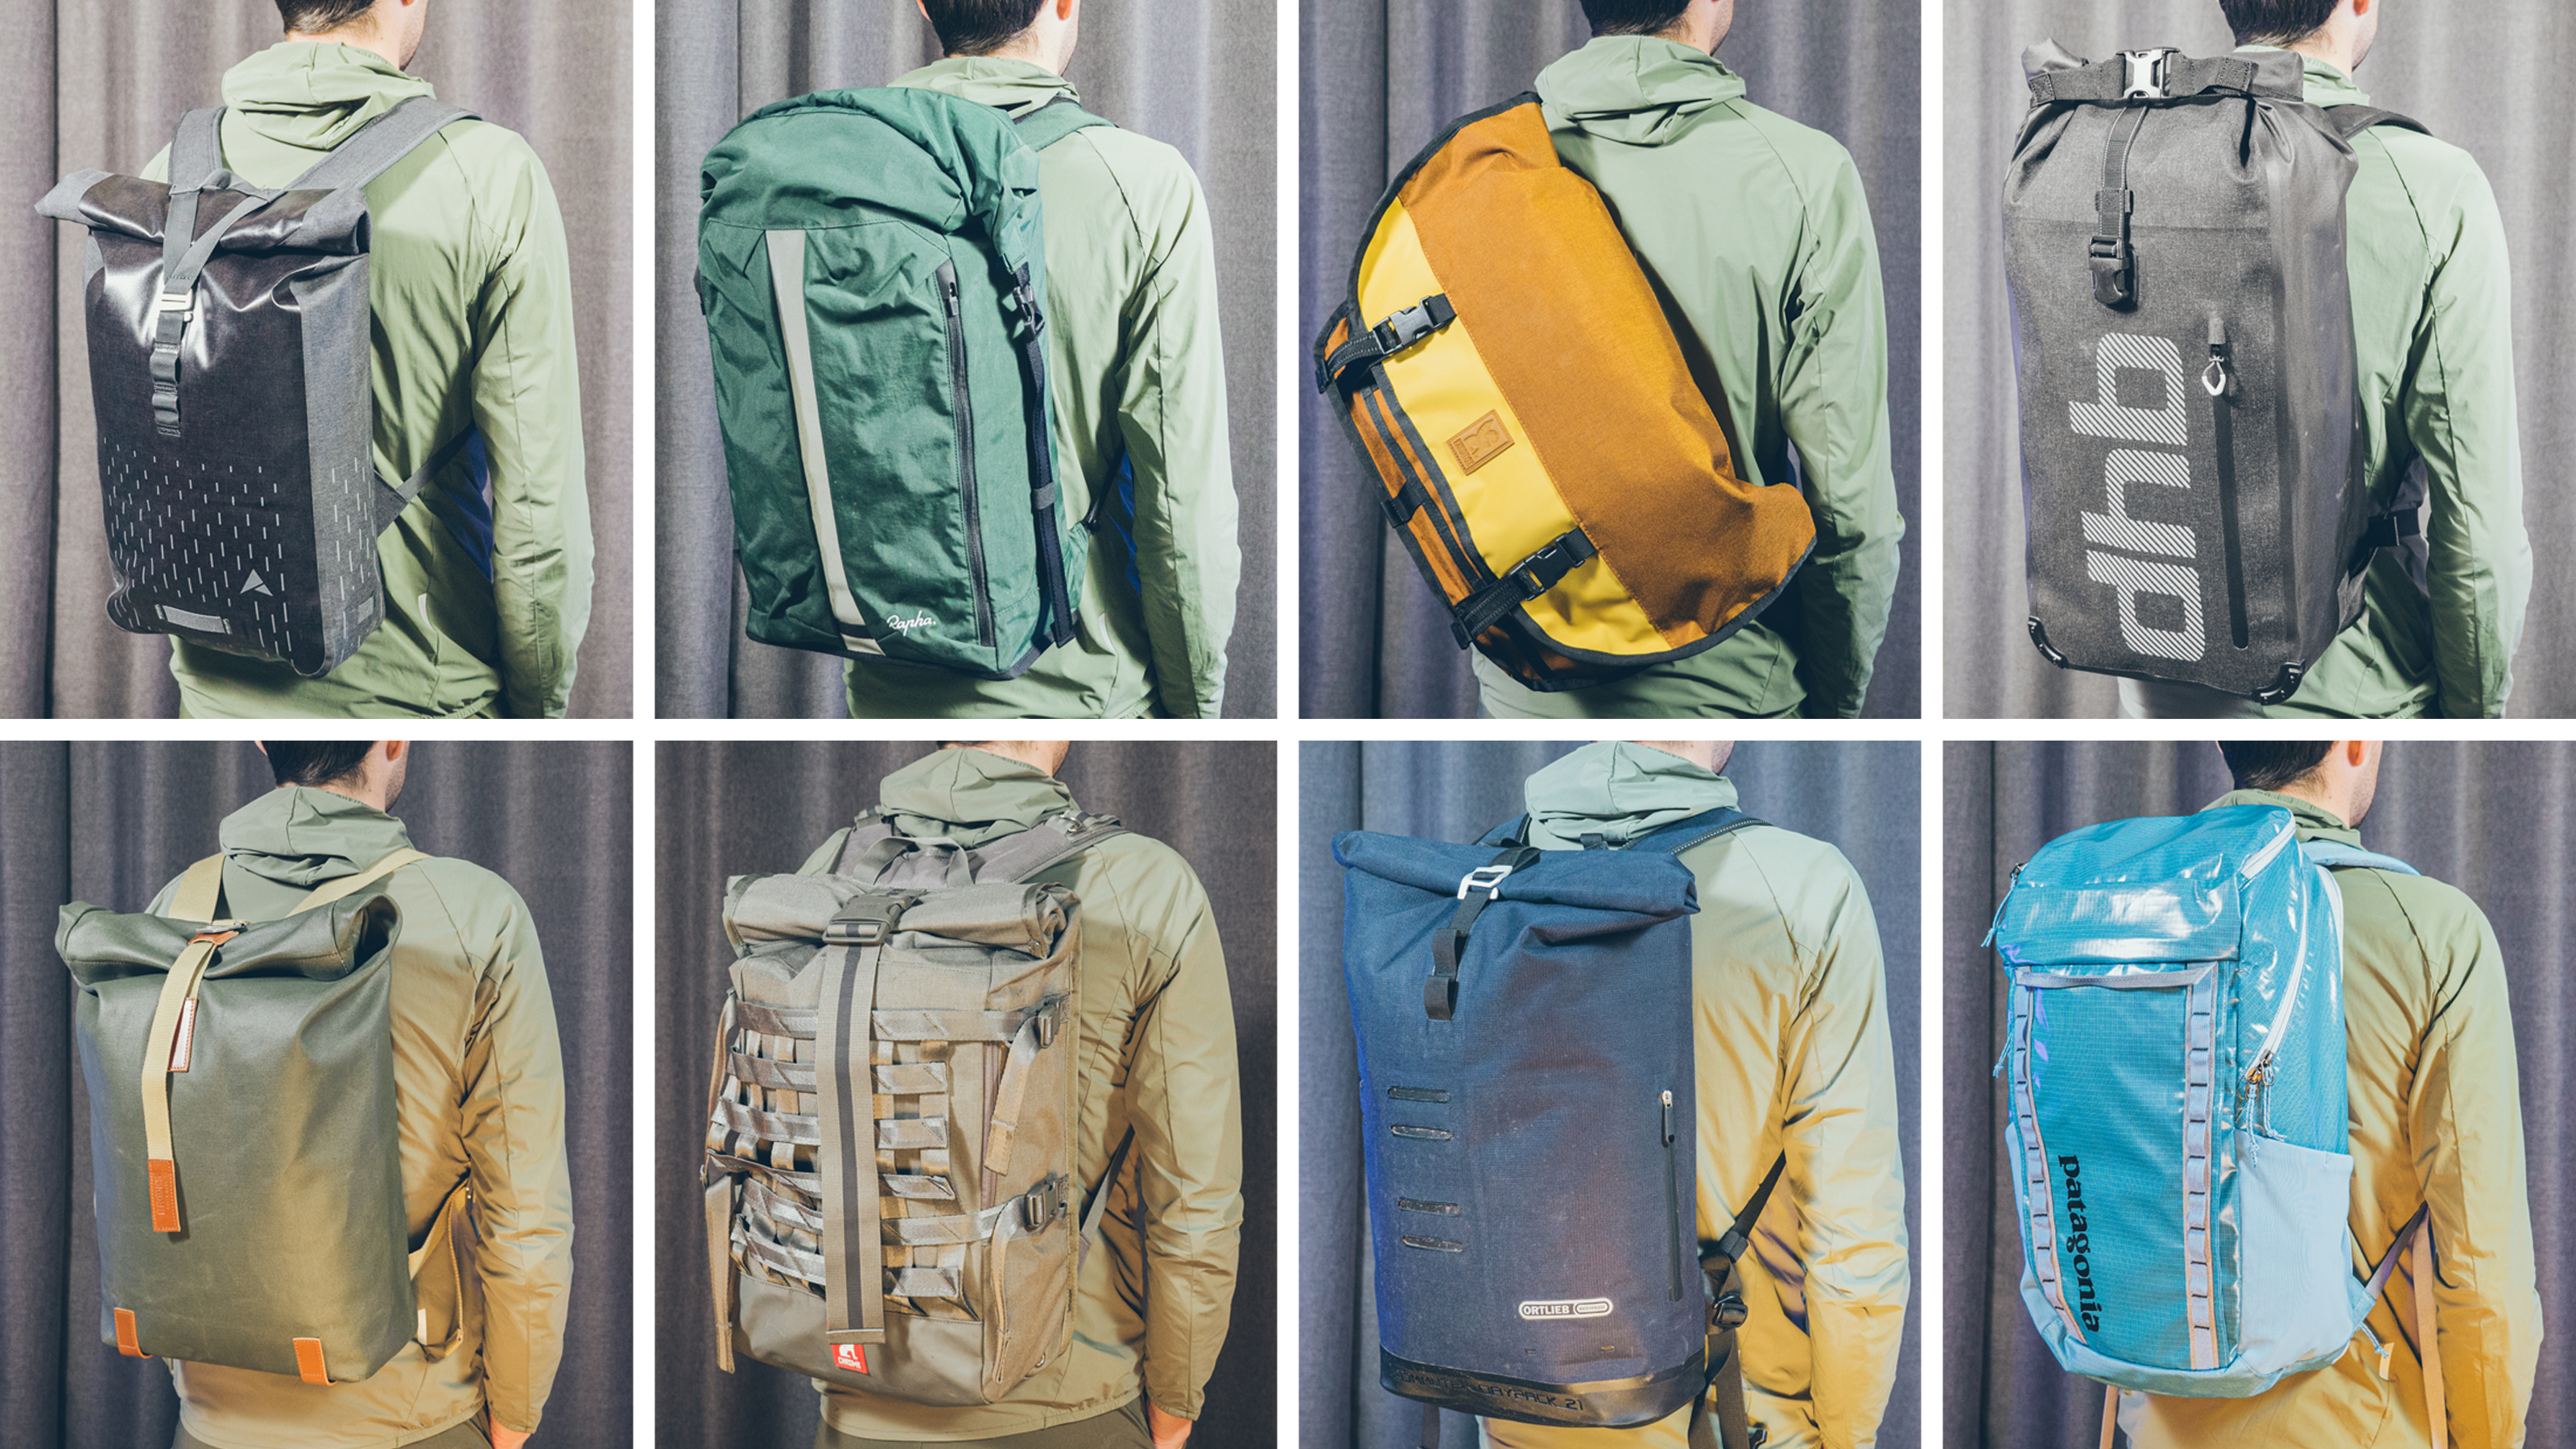 The 10 Best Waxed Canvas Backpacks for Men  Best Value, Coolest, Most  Technical, Coolest, and More! 